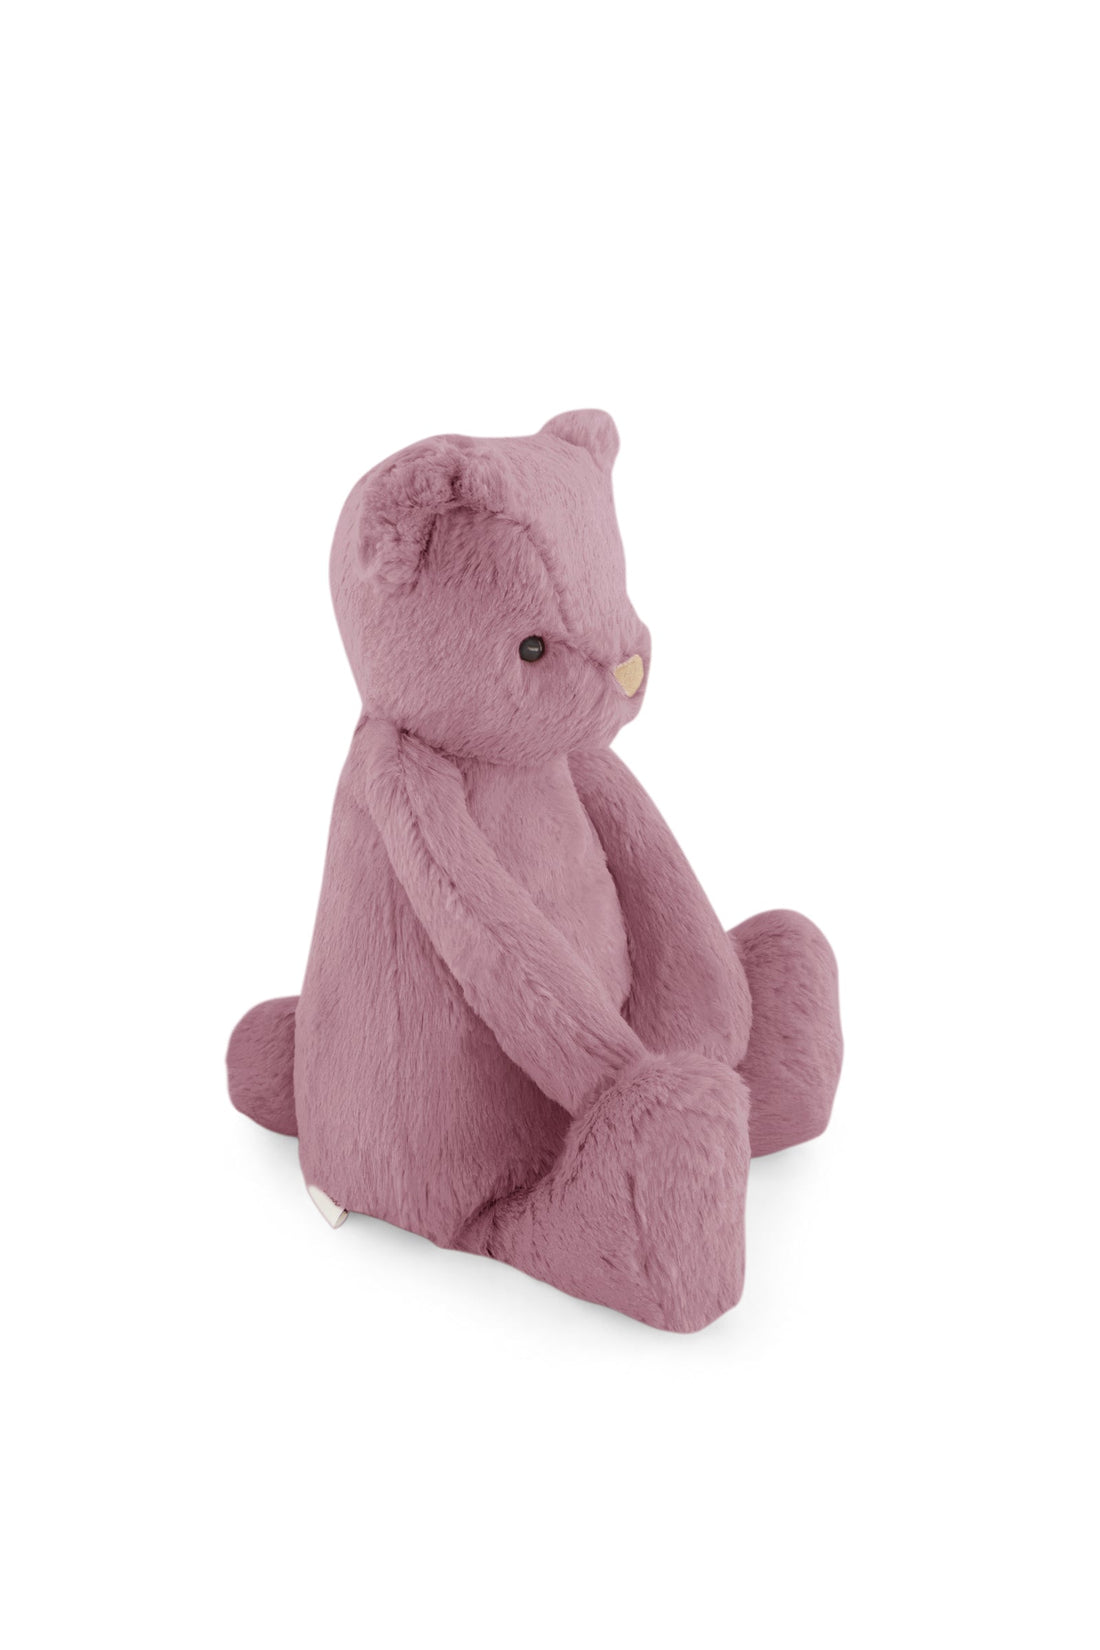 Snuggle Bunnies - George the Bear - Lilium Childrens Toy from Jamie Kay NZ